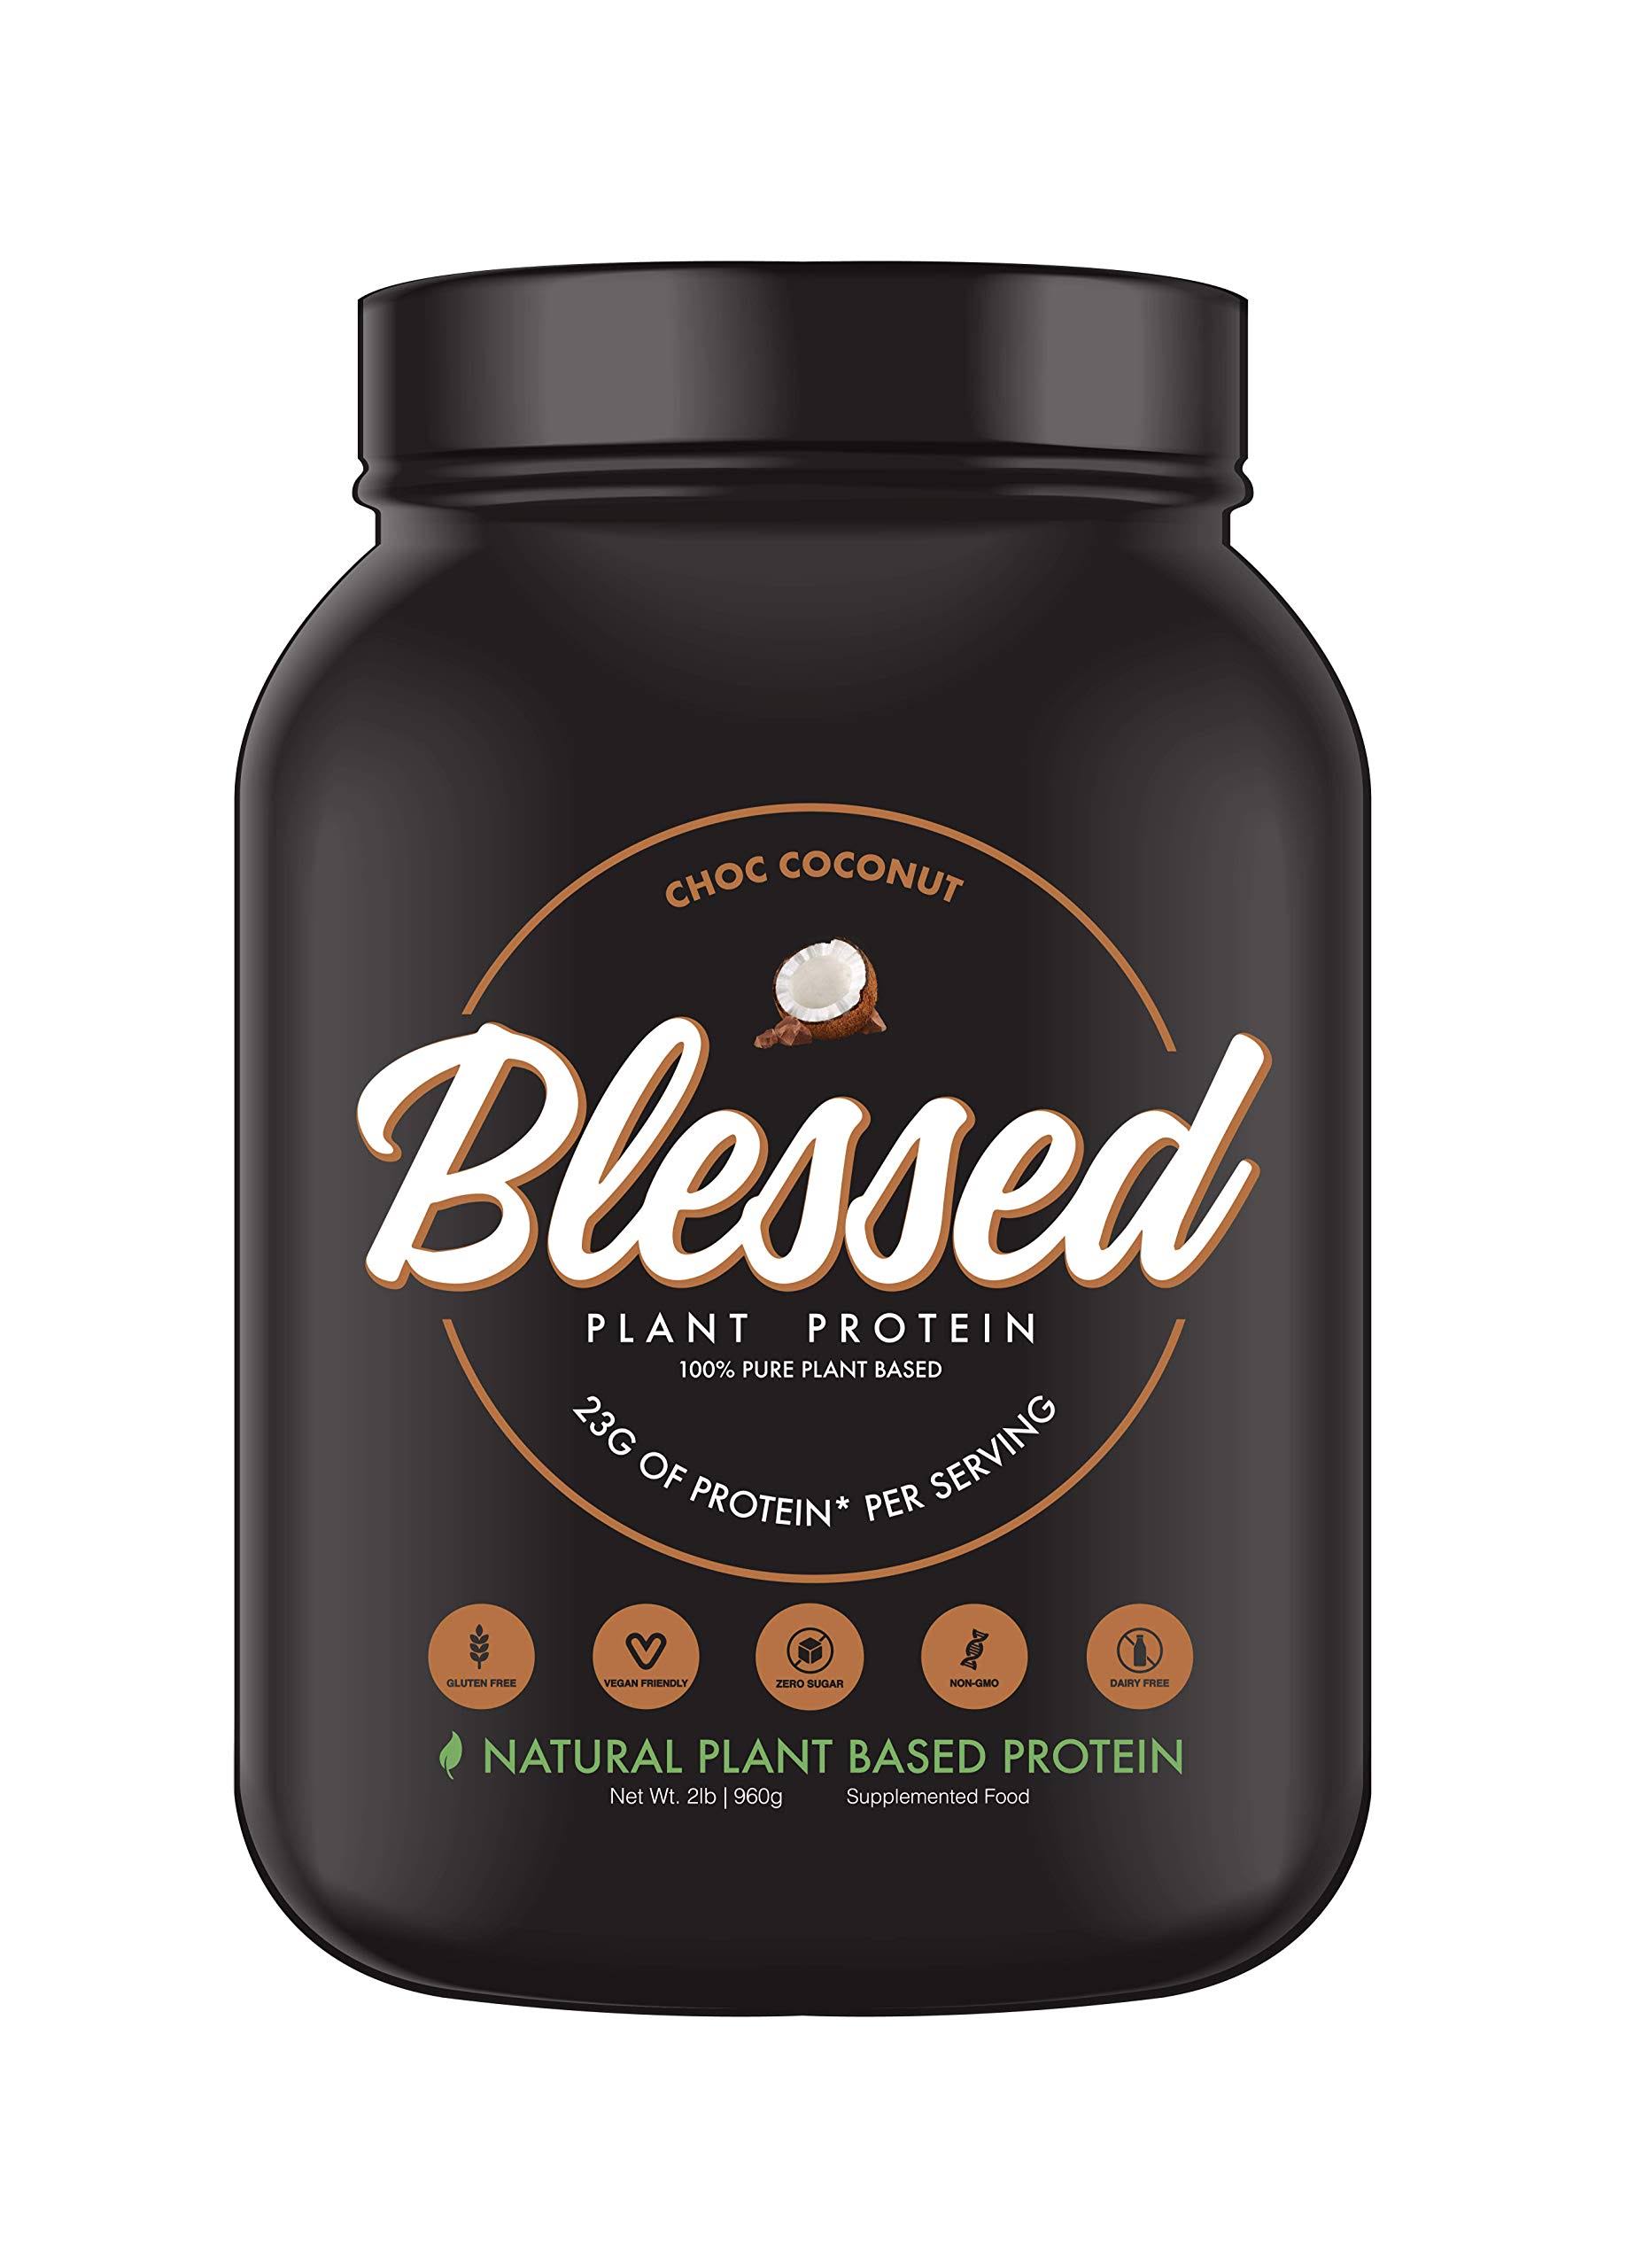 Blessed | Plant Protein 2lbs - Choc Coconut